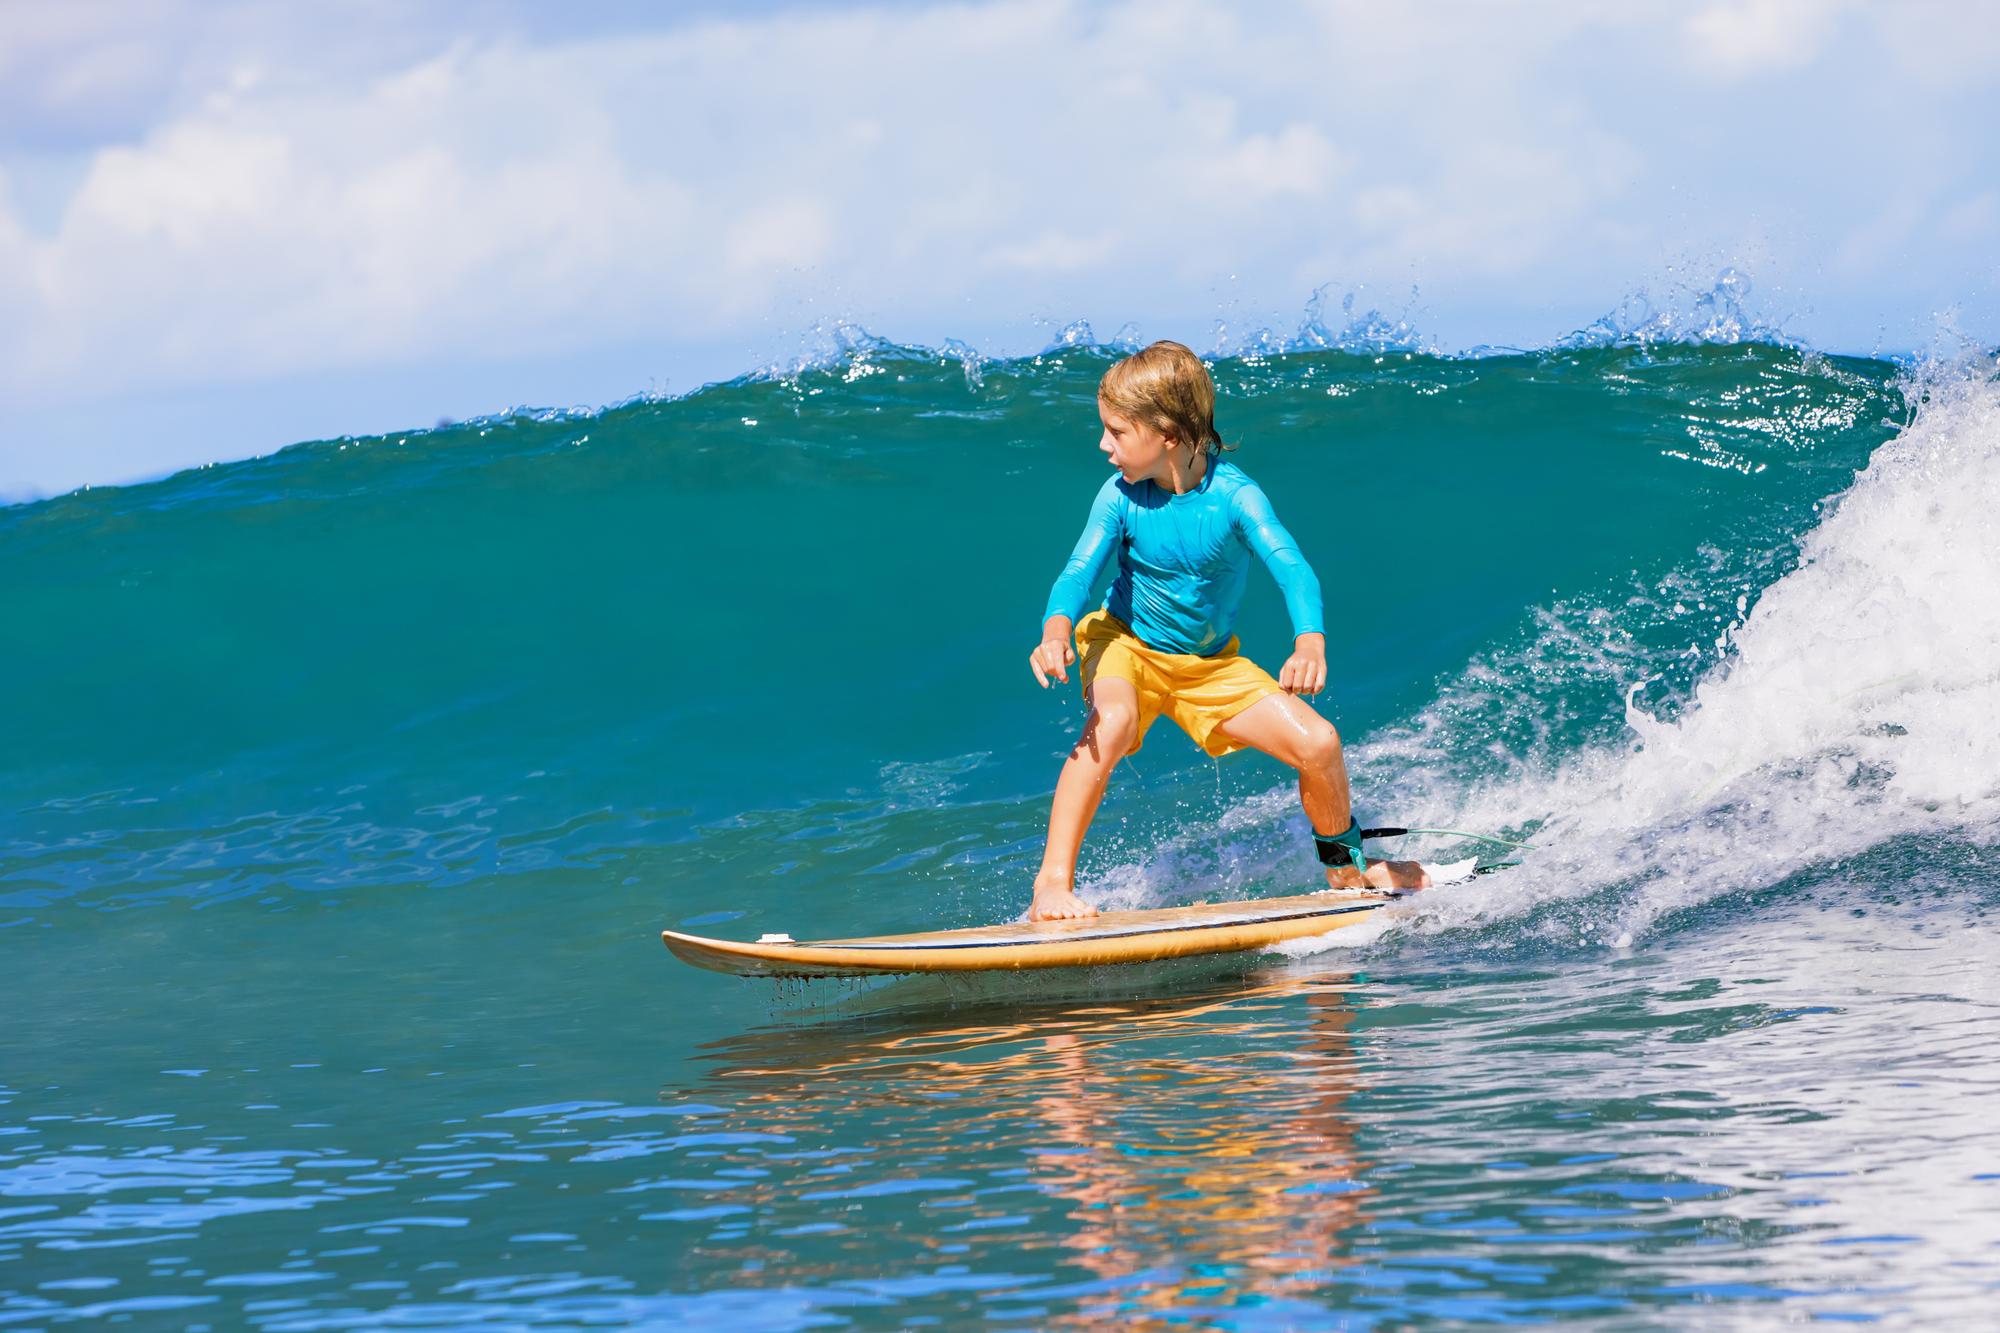 Local Ocean Adventure Company Launches Summer Surf Camp For Kids